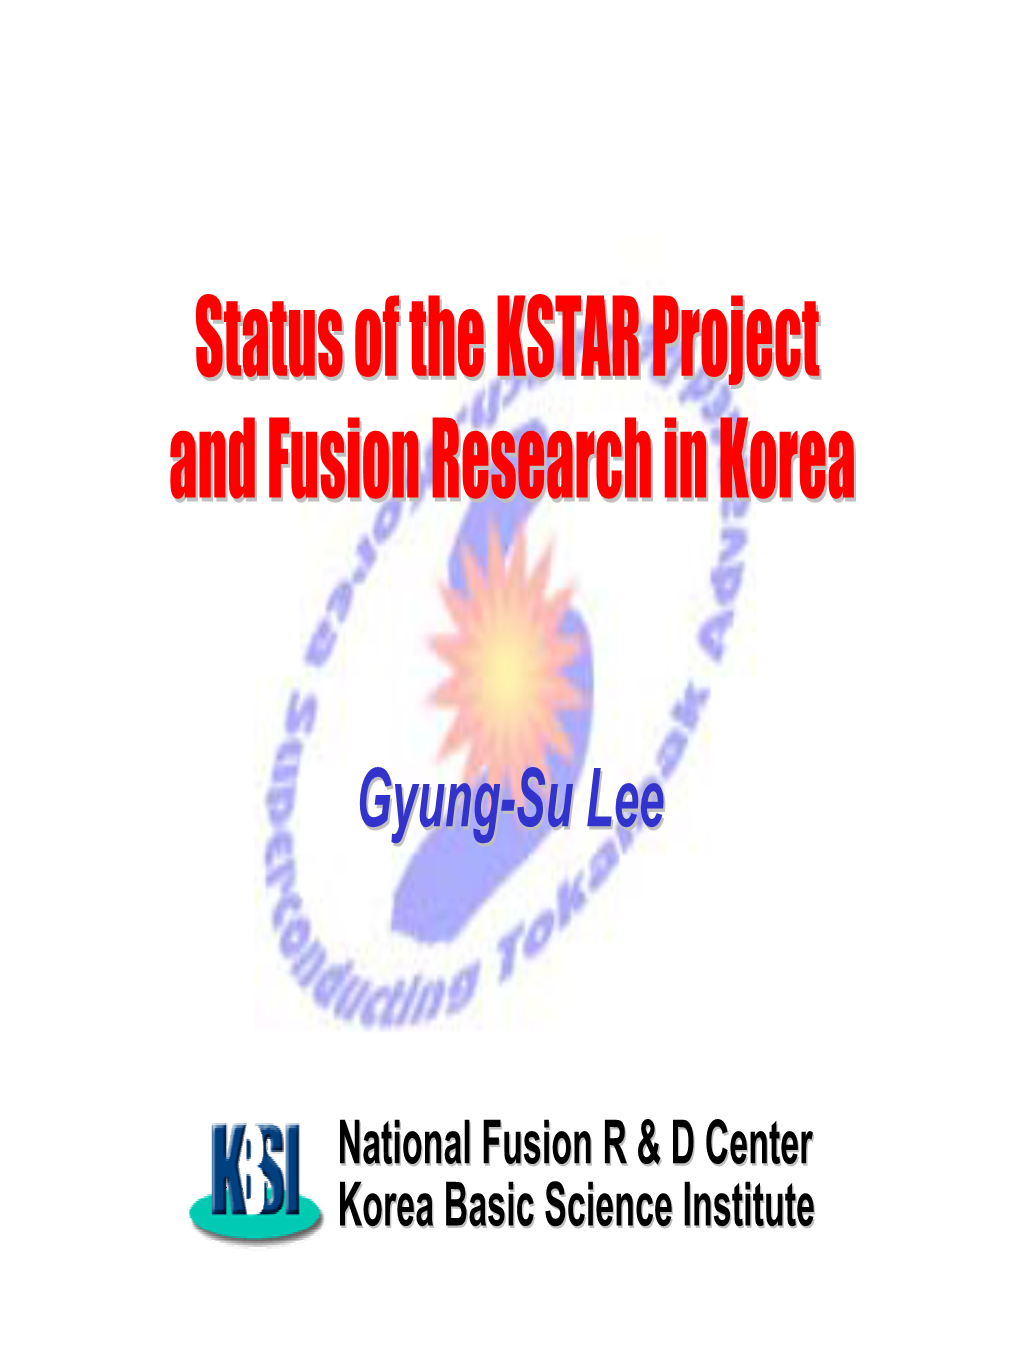 Status of KSTAR Project and Fusion Research in Korea